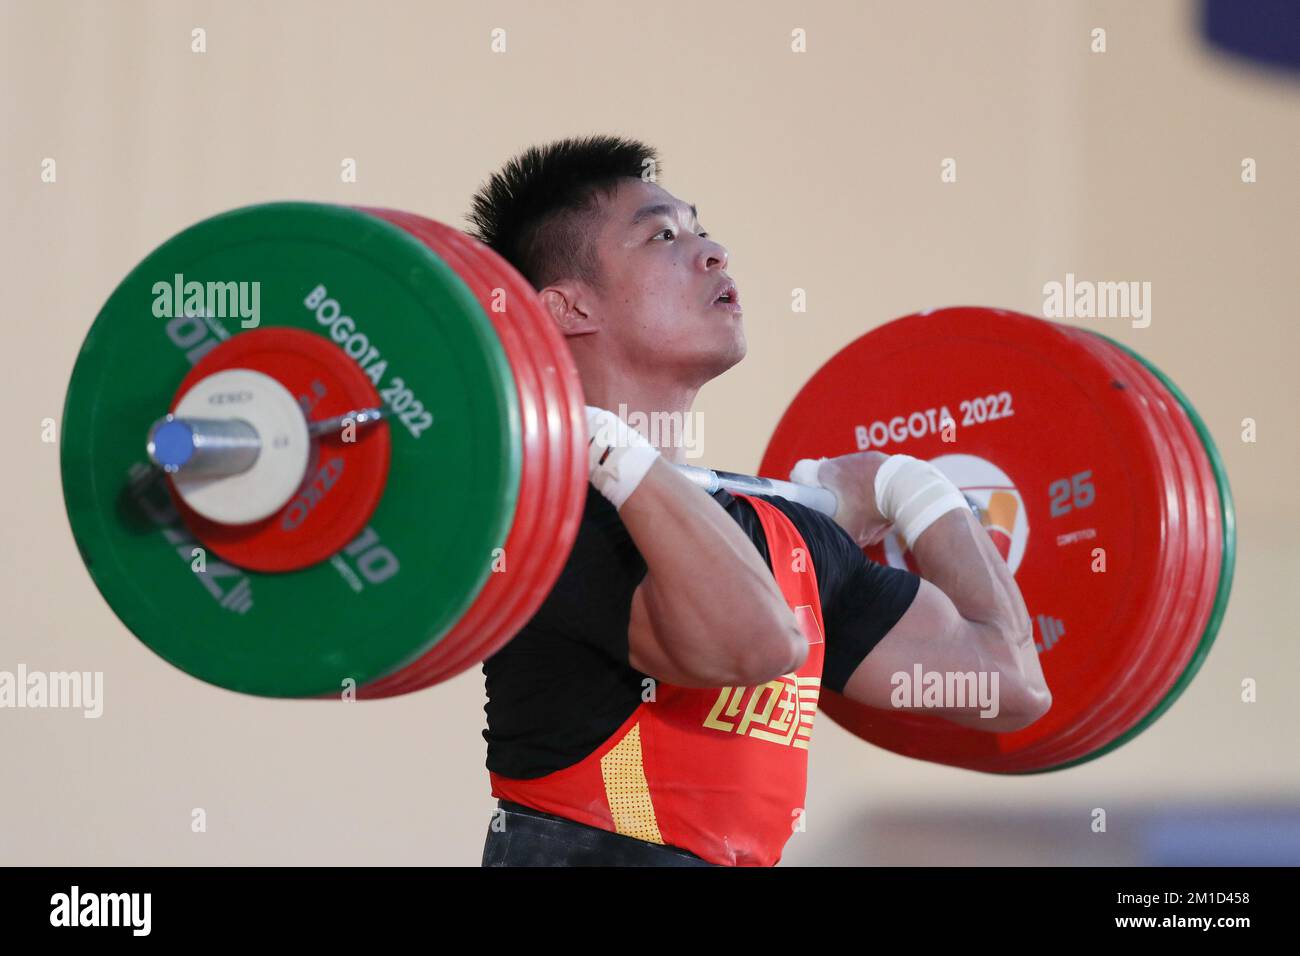 Bogota, Colombia. 11th Dec, 2022. Liu Huanhua of China competes during the mens 89kg snatch event at the 2022 World Weightlifting Championships in Bogota, Colombia, Dec